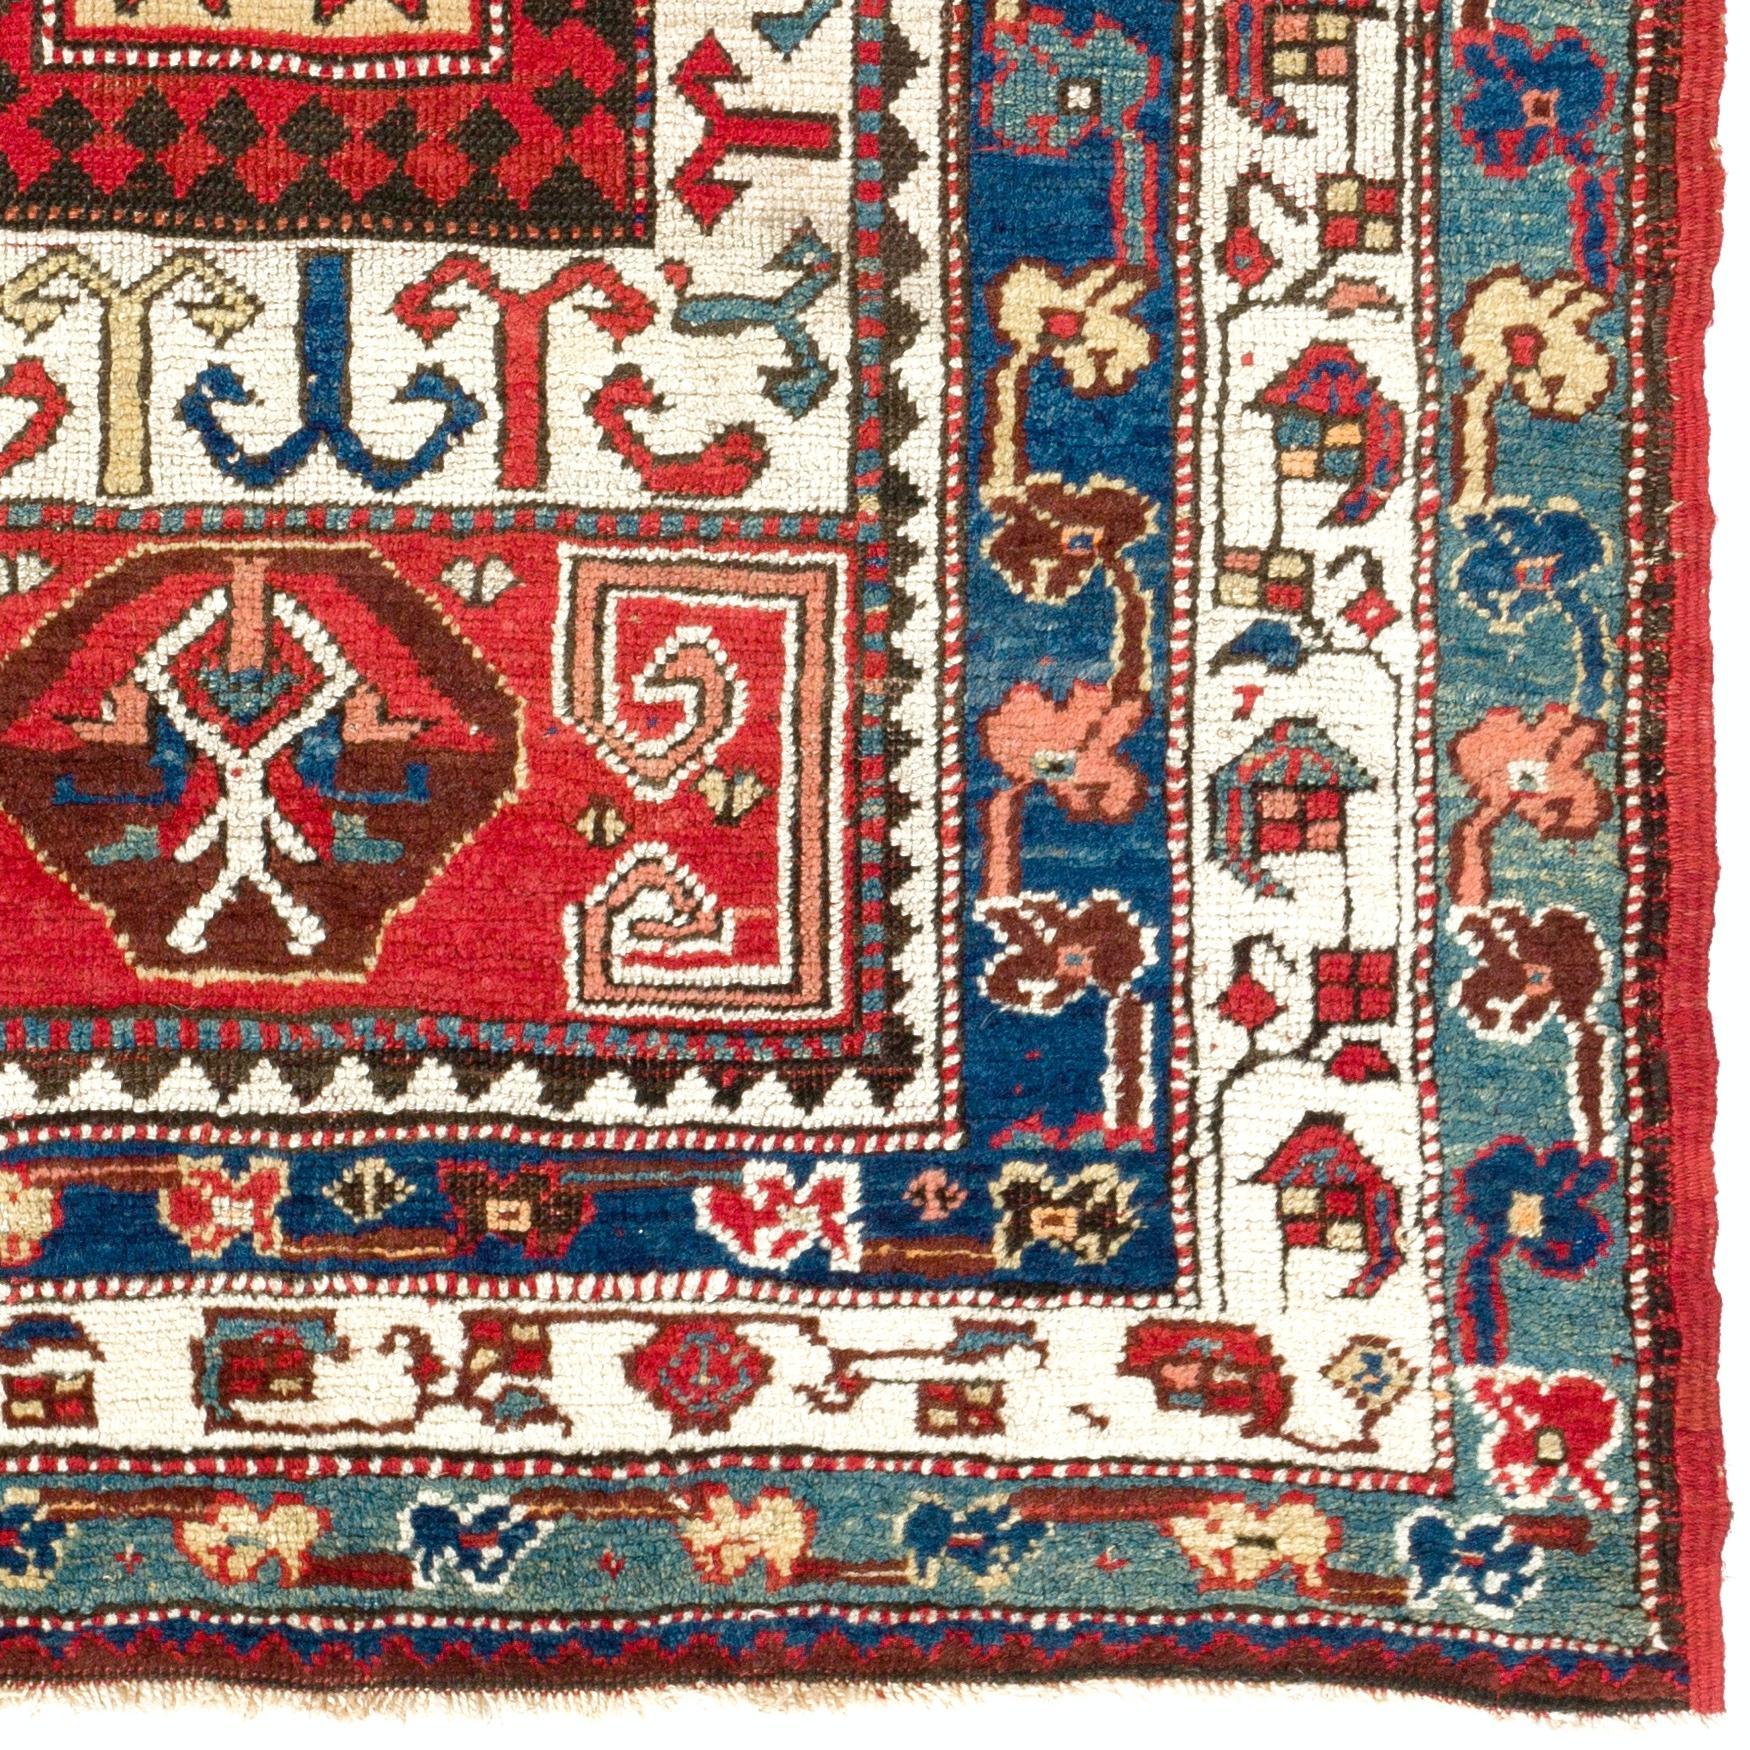 Hand-Knotted 3.5x5.5 ft Antique South Caucasian Shahsavan Rug, Ca 1890 For Sale